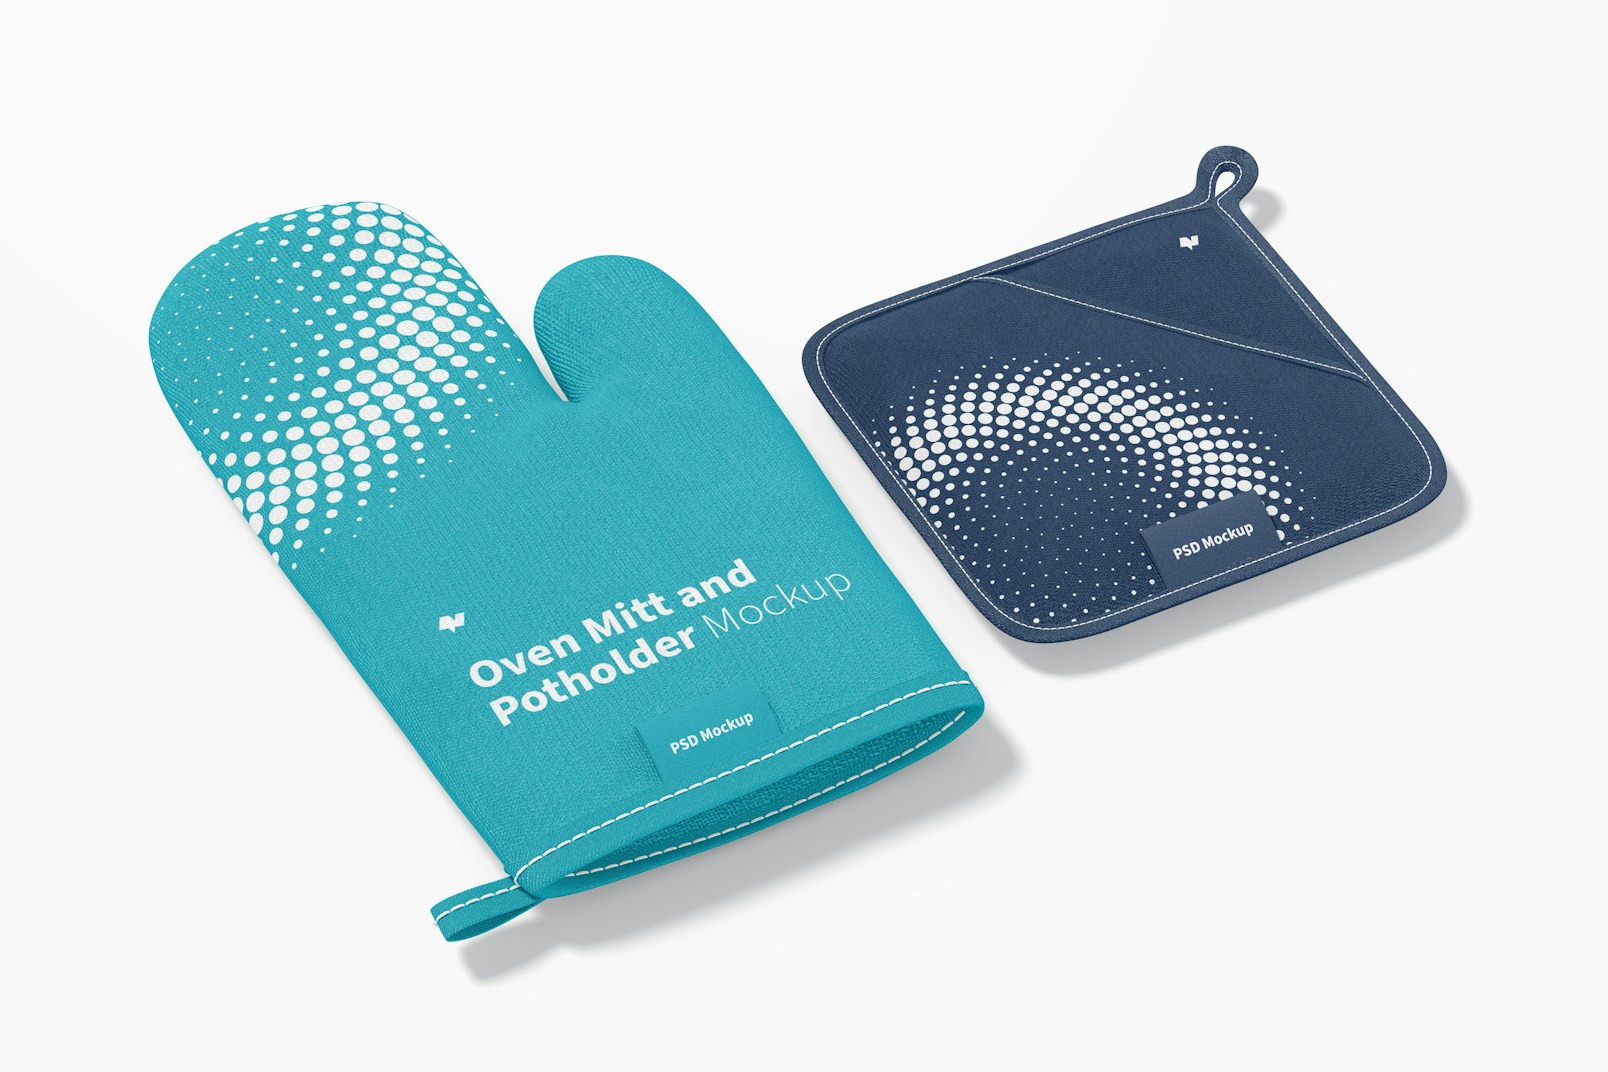 Oven Mitt and Potholder Mockup, Perspective View